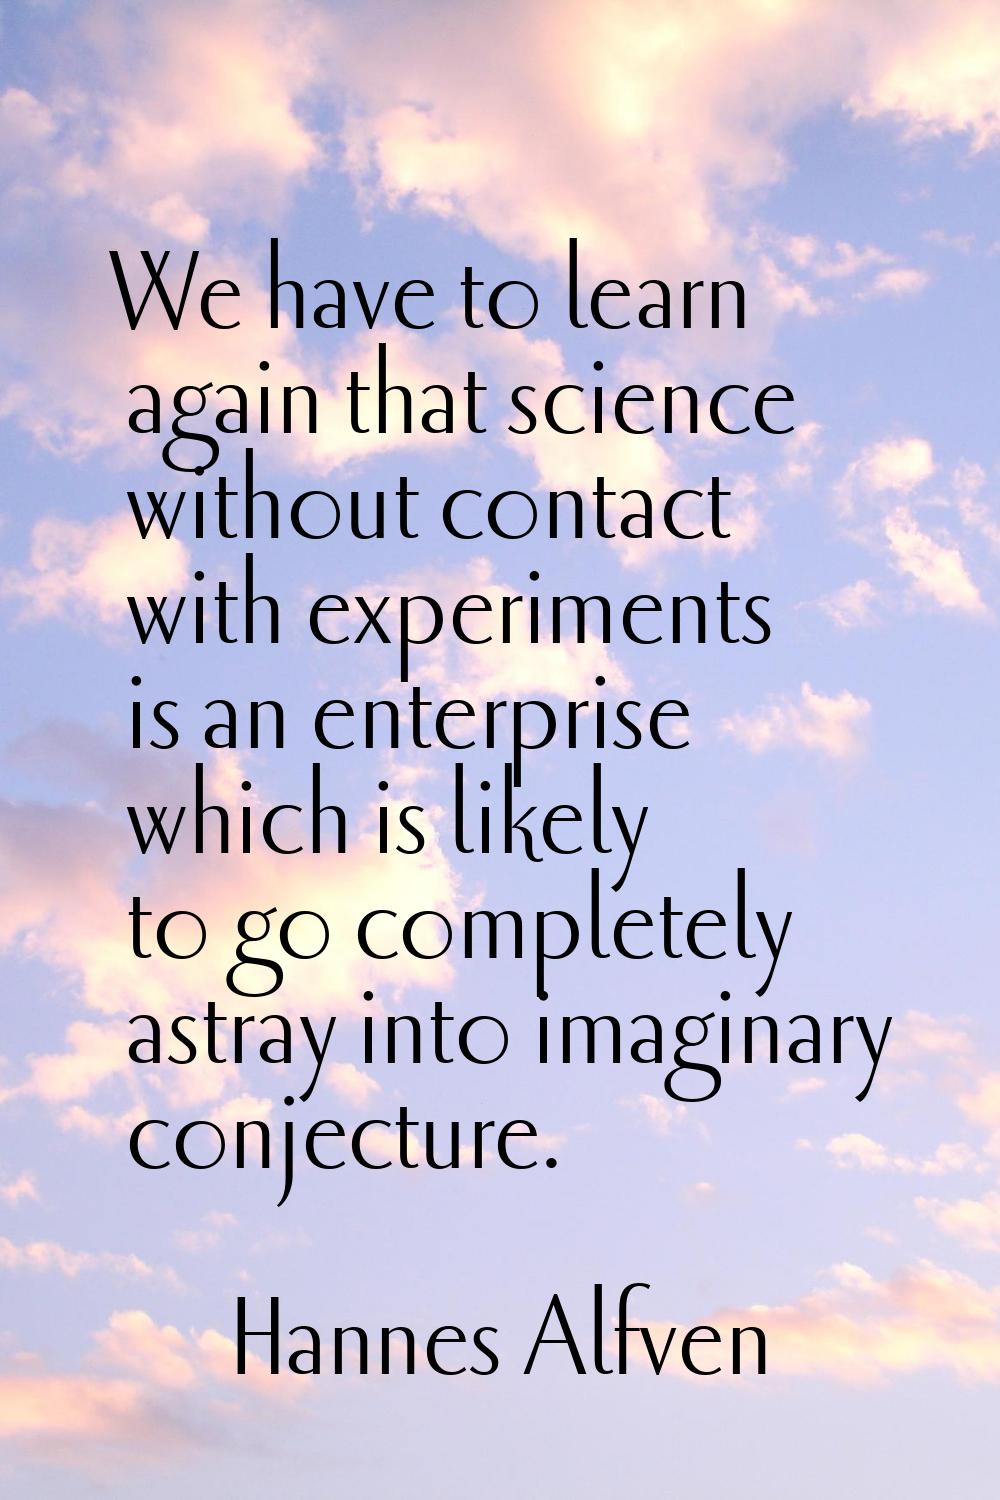 We have to learn again that science without contact with experiments is an enterprise which is like